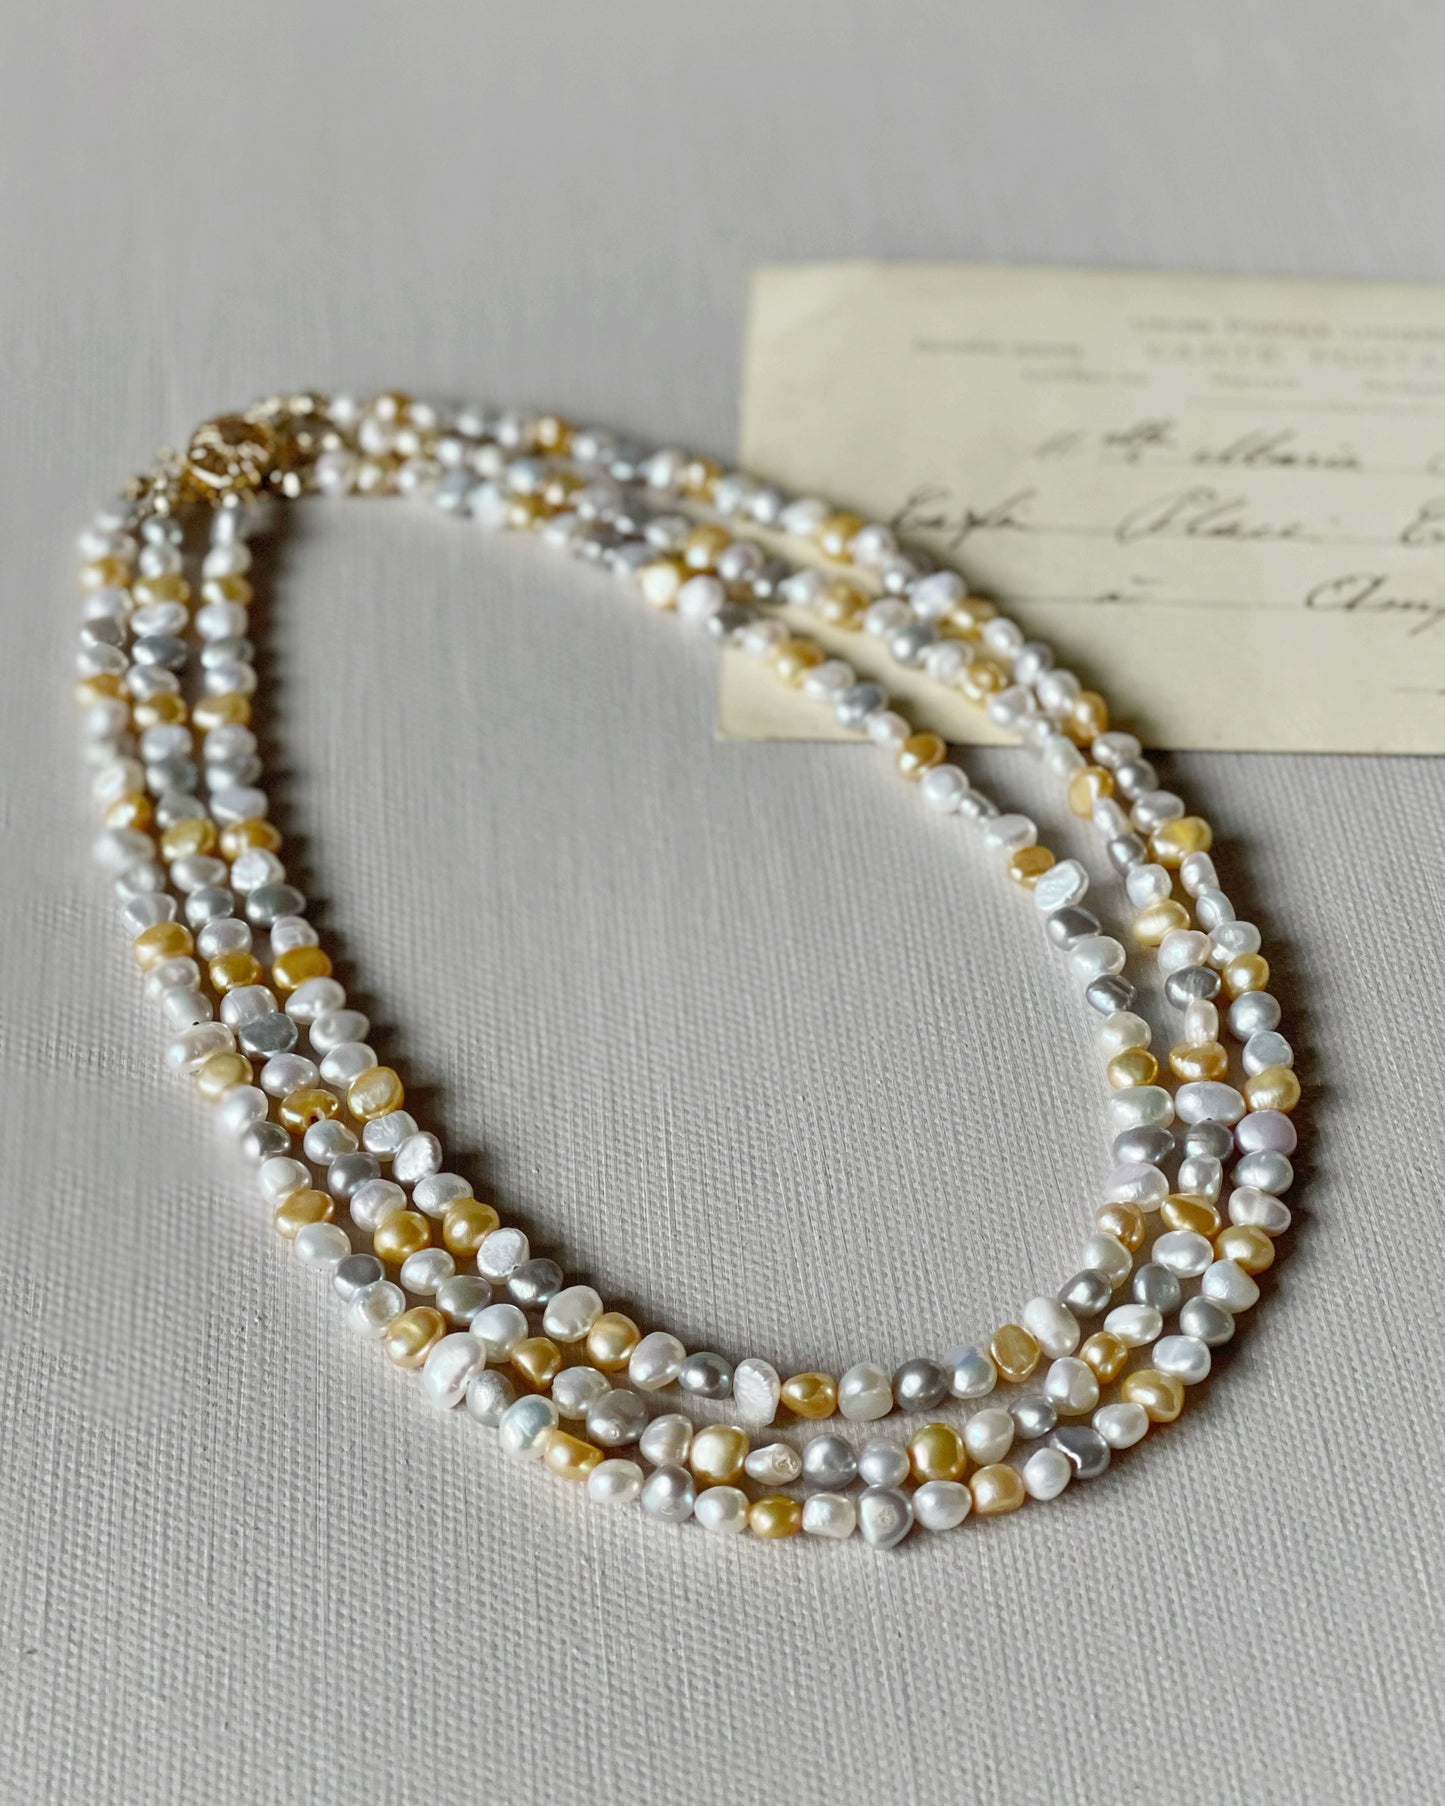 Three-strand coloured freshwater pearls necklace